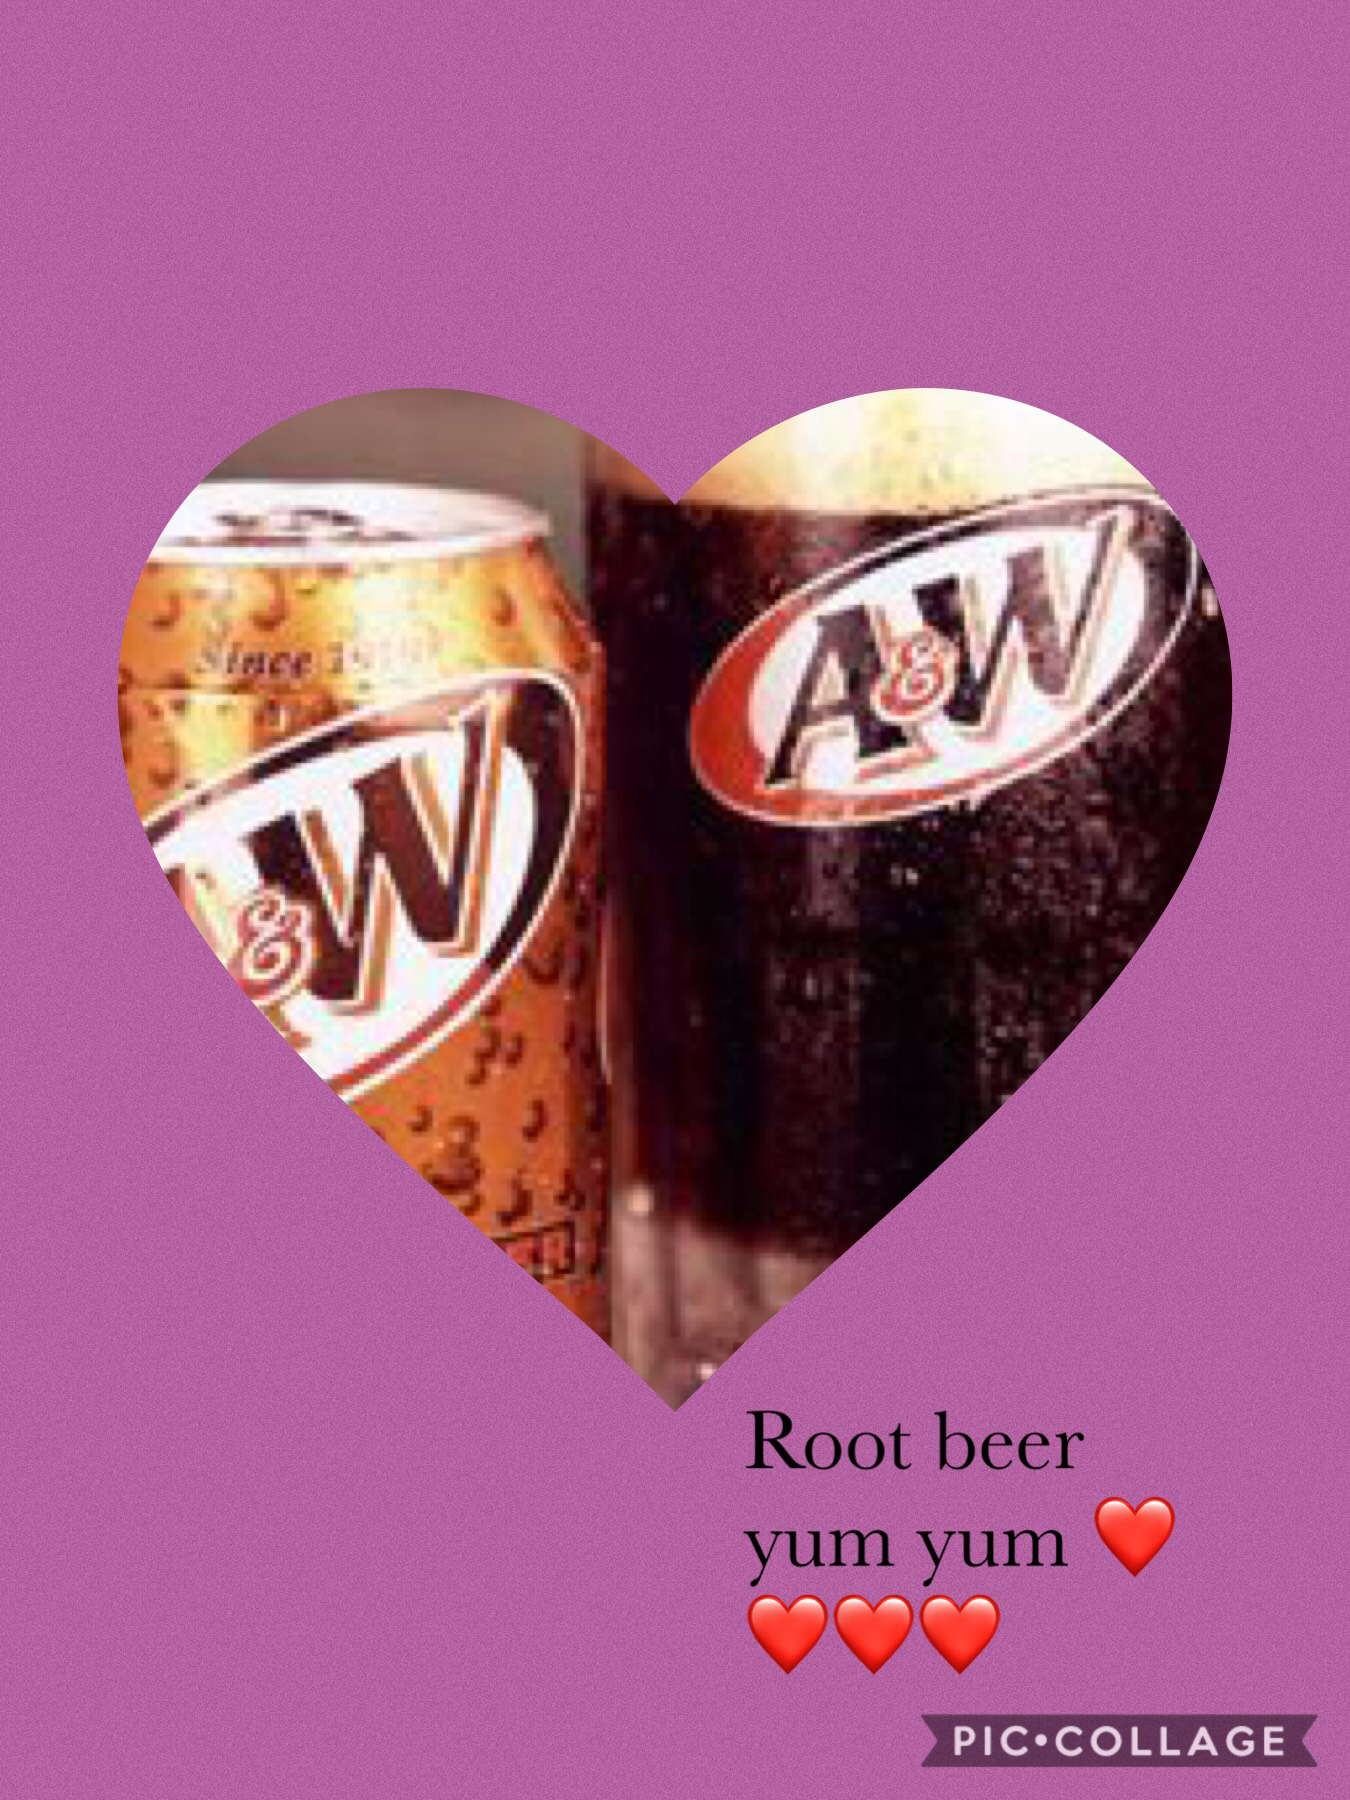 If u love root beer fallow me and like my pictures and if will do the same